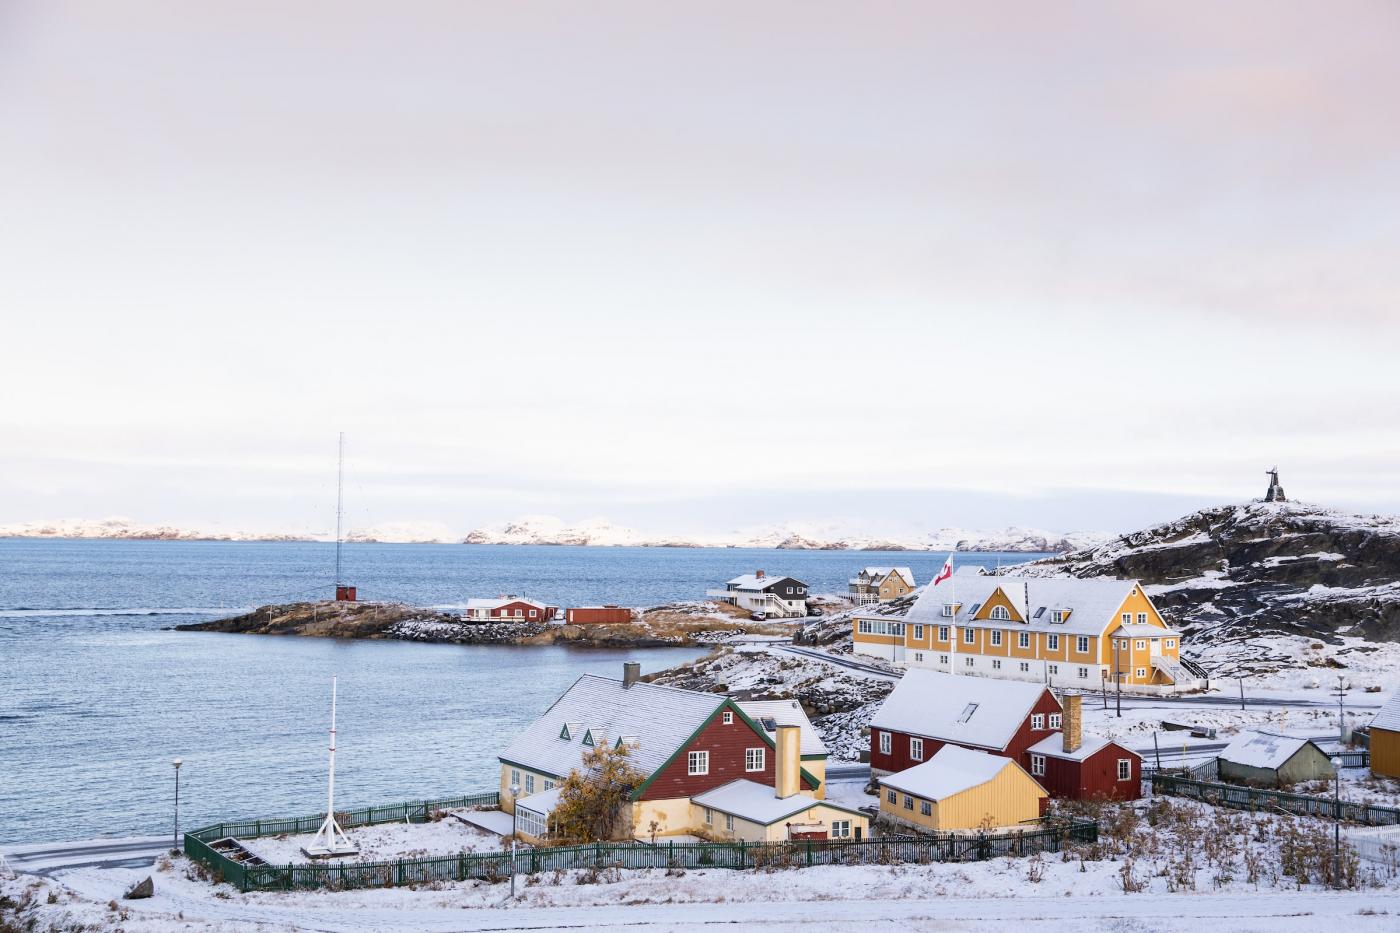 The Old Part Of Nuuk. Photo - Matthew Littlewood, Visit Greenland